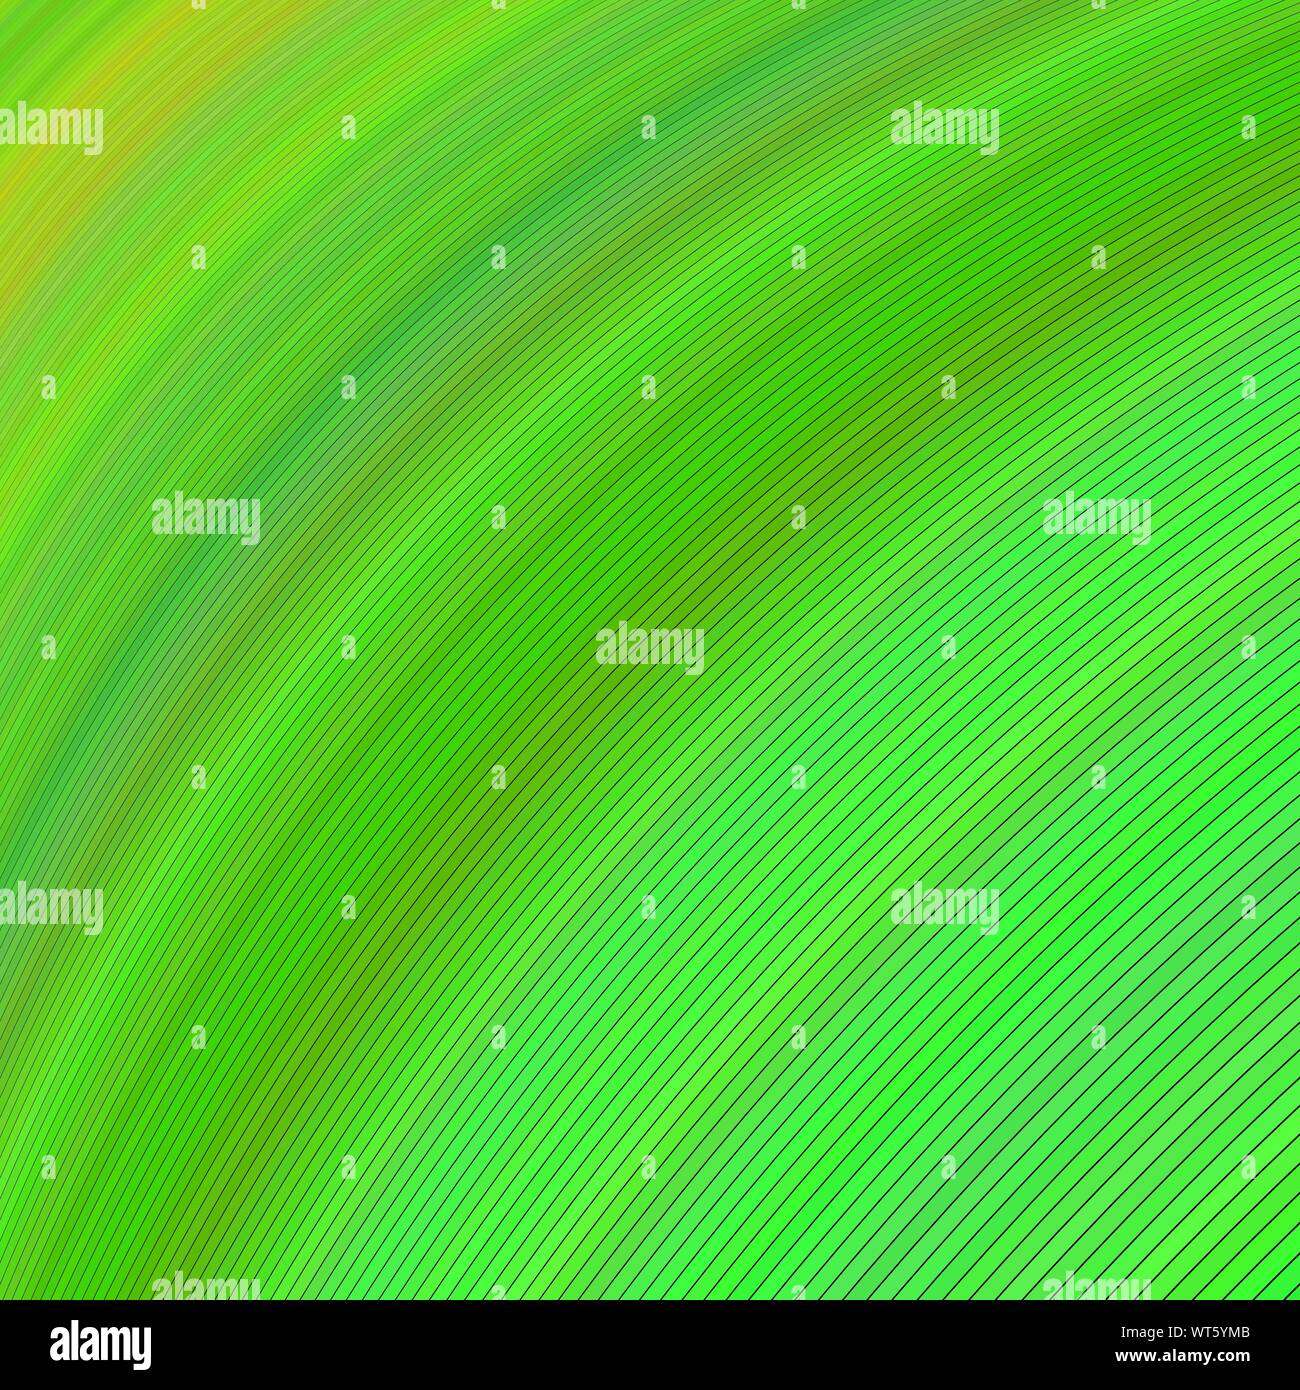 Green abstract computer generated background design vector Stock Vector